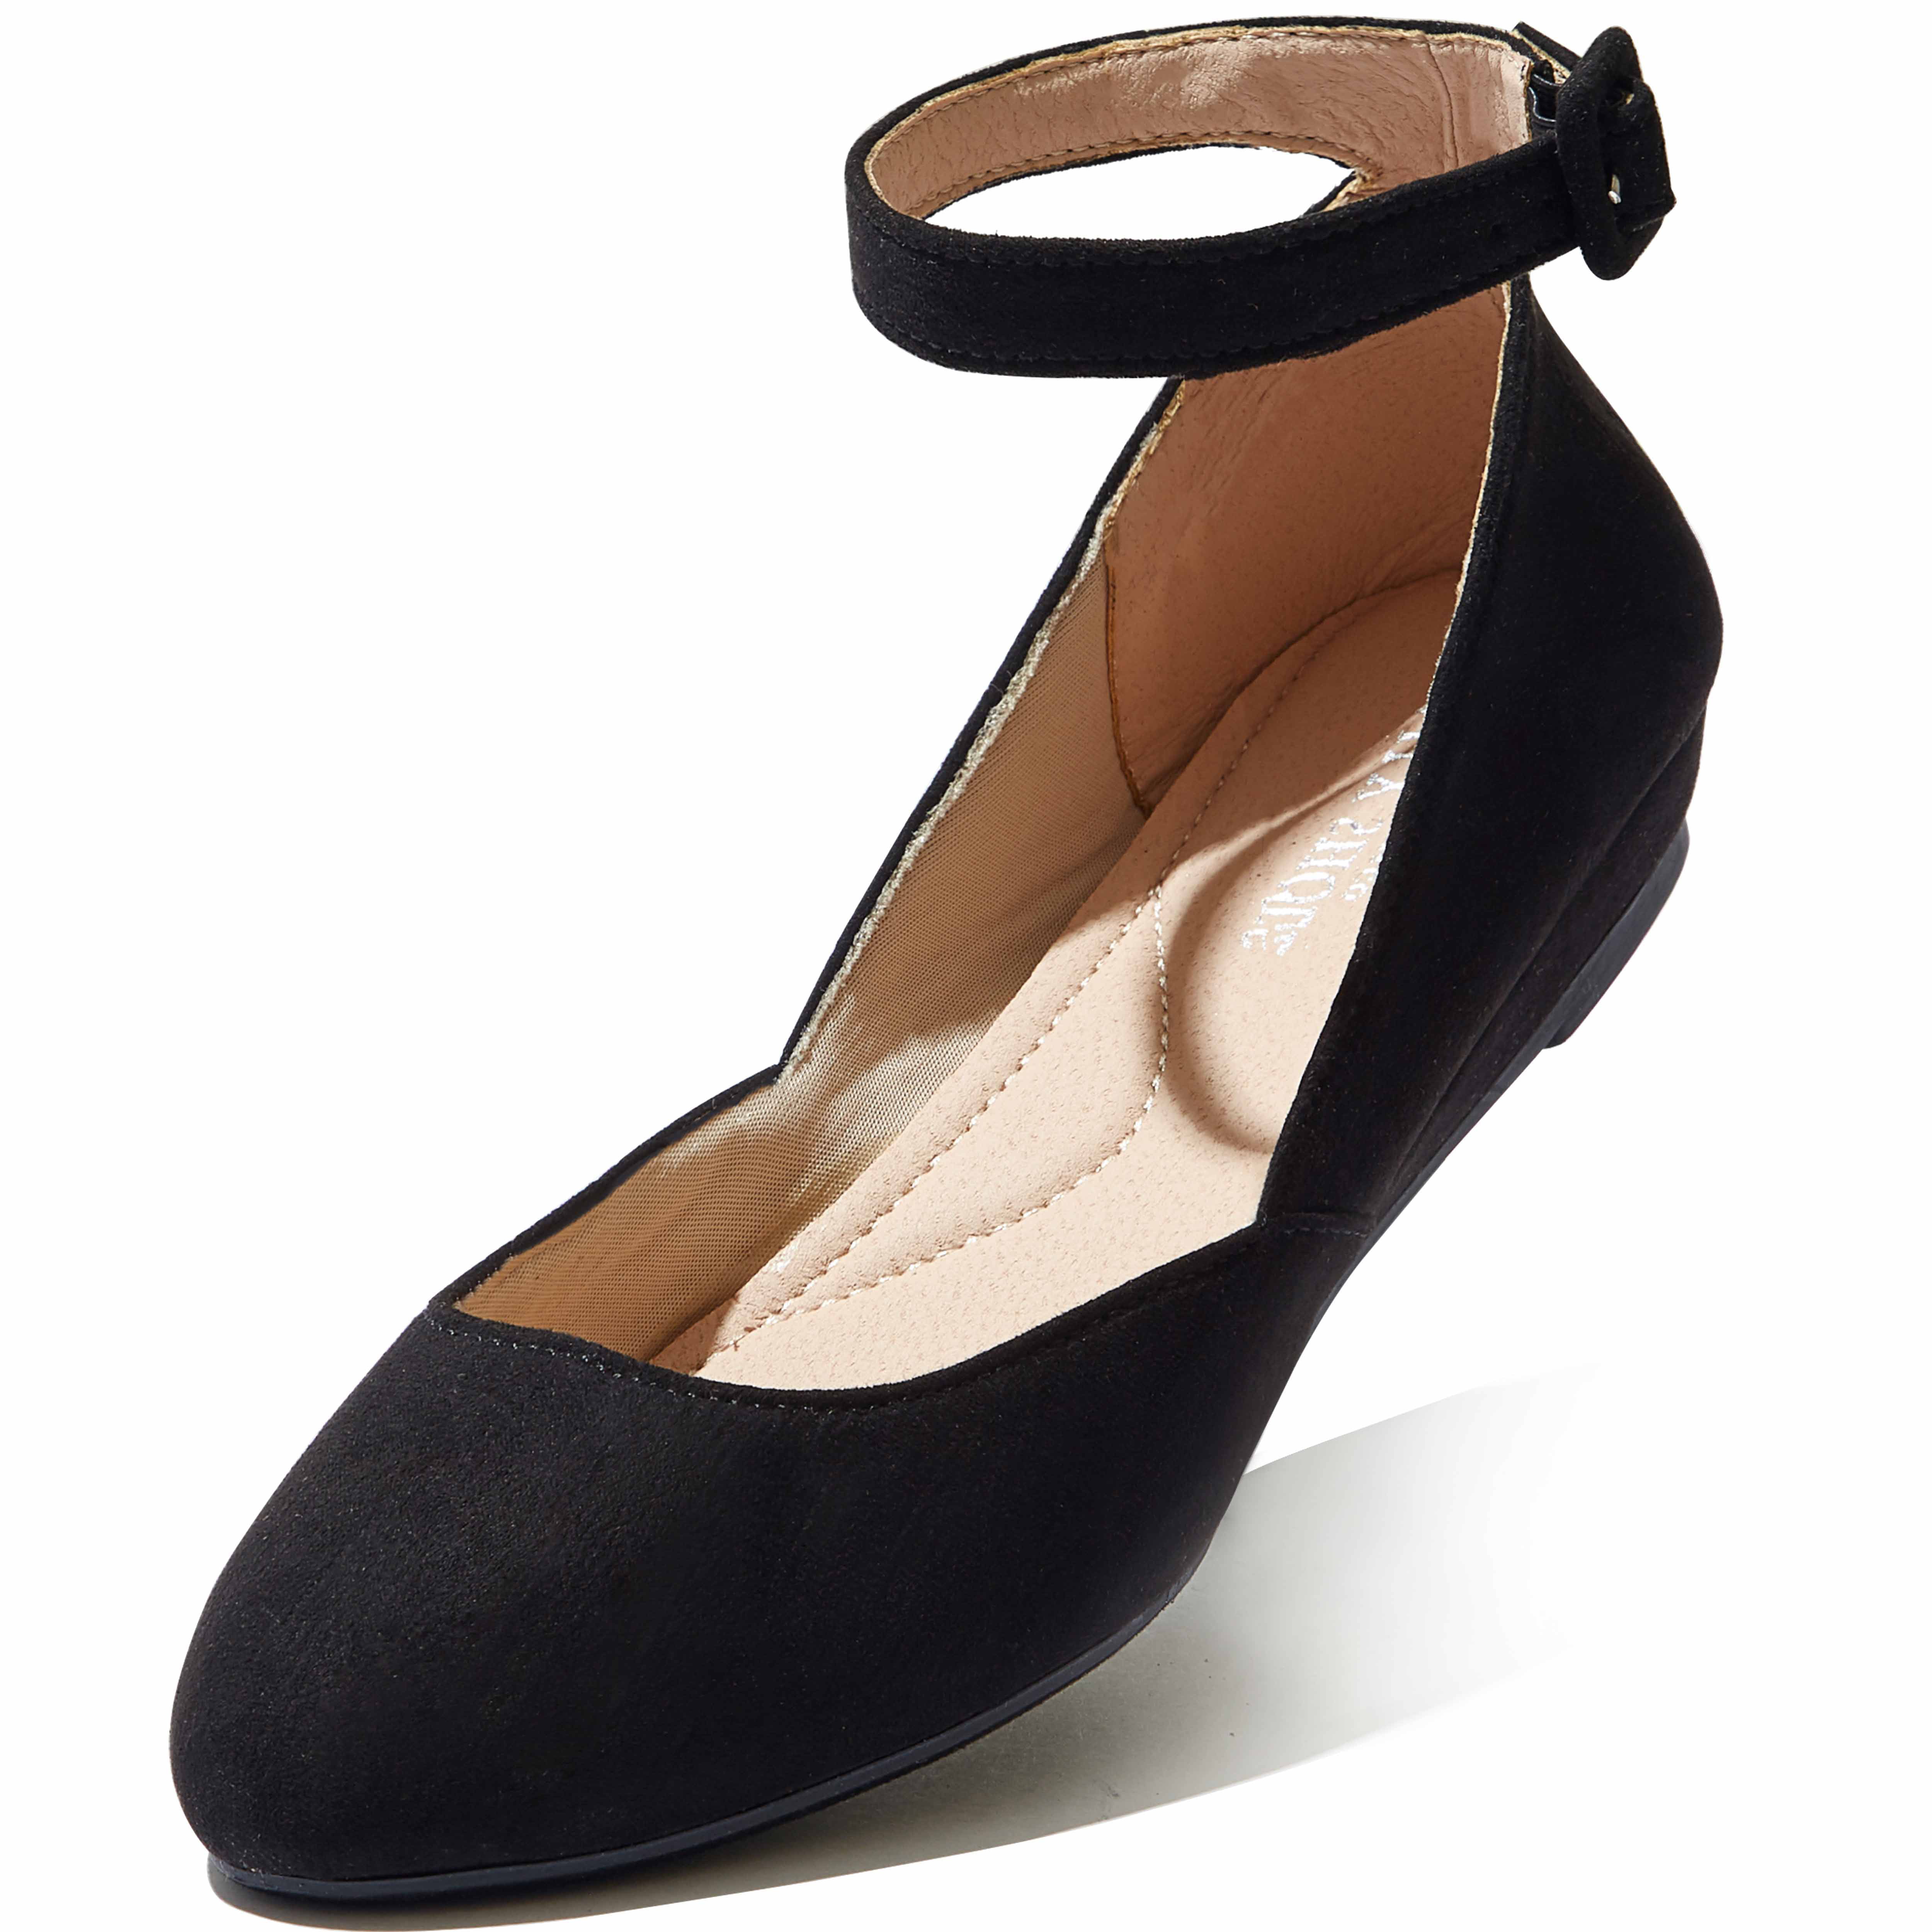 black flat shoes with ankle strap